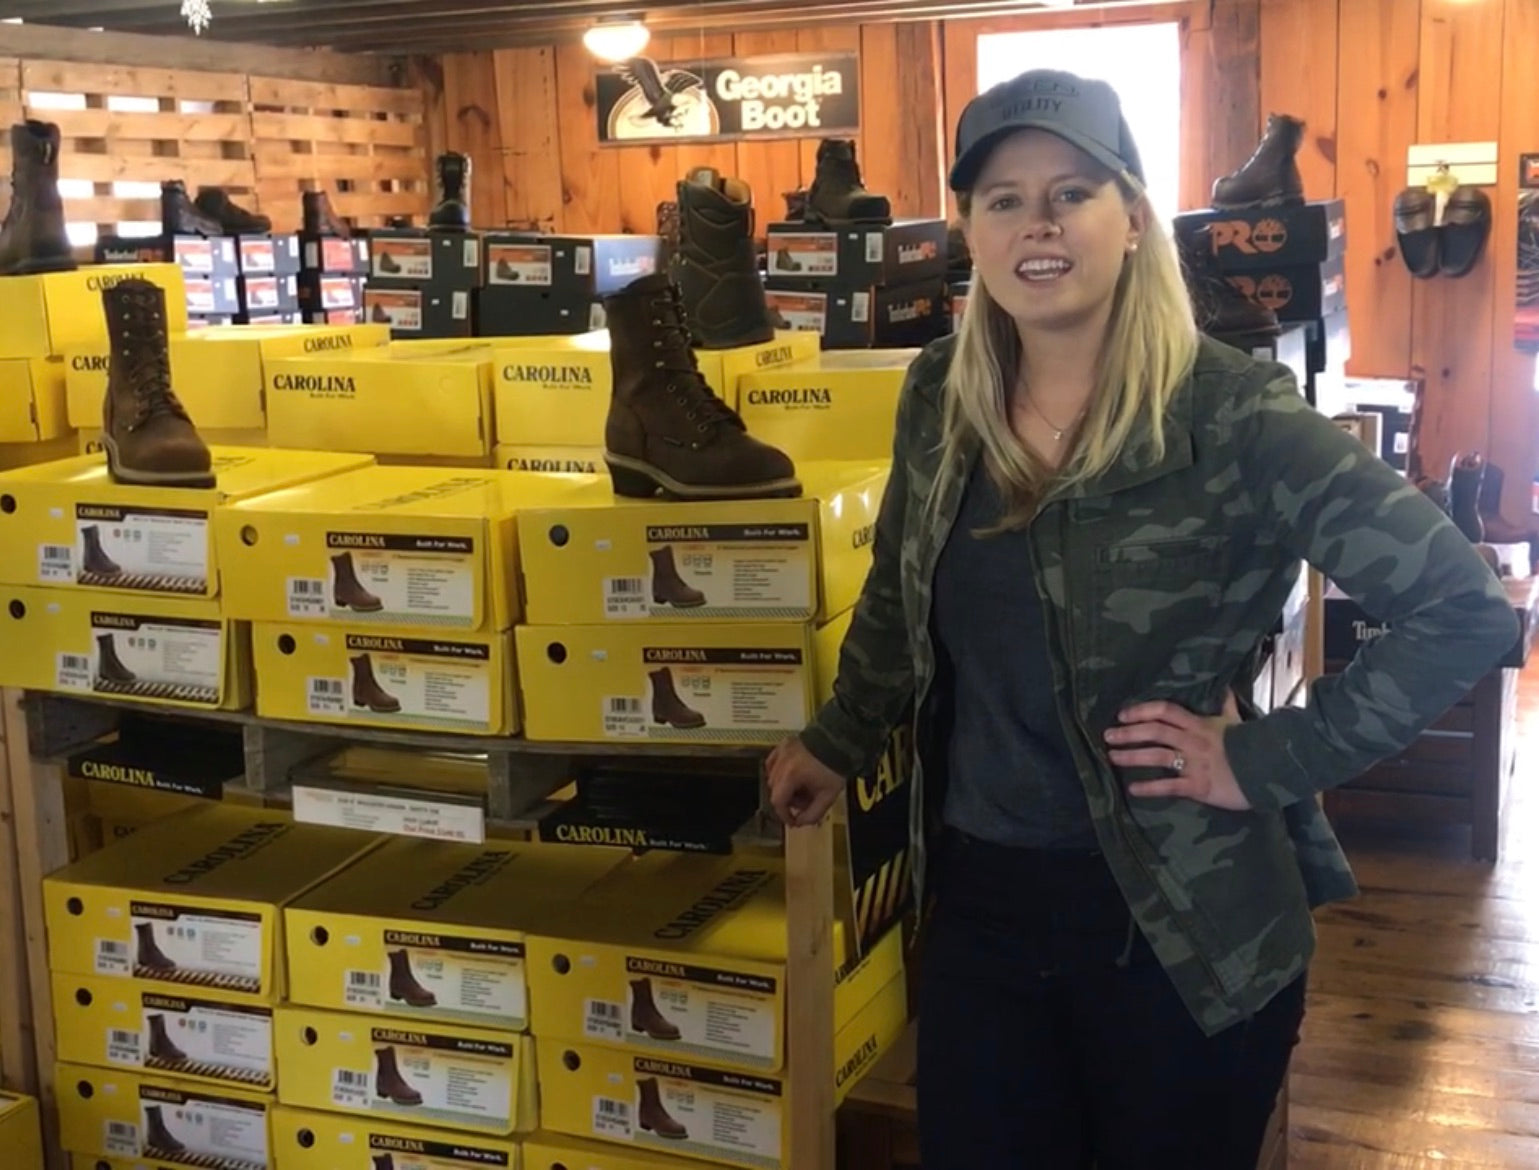 A woman standing in Overlook Boots shop